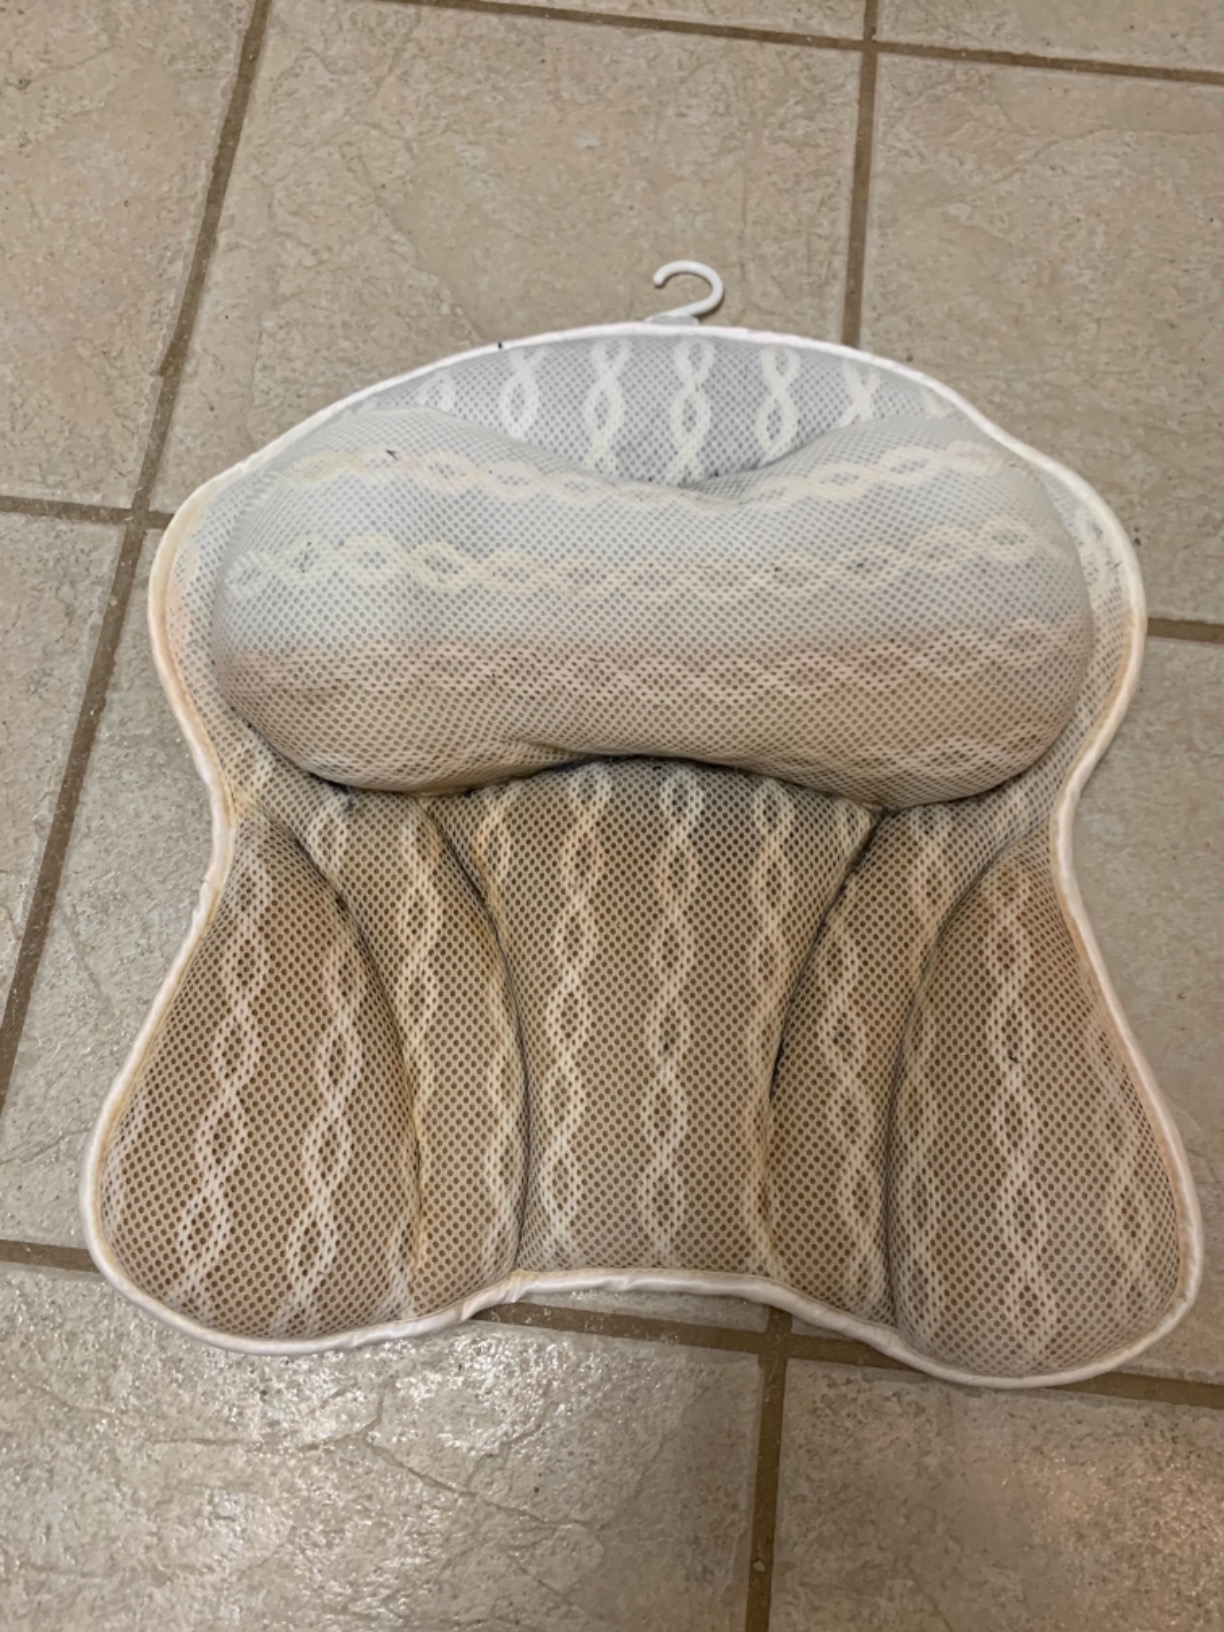 Premium Shower Pillow for Stress Relief and Rejuvenation photo review